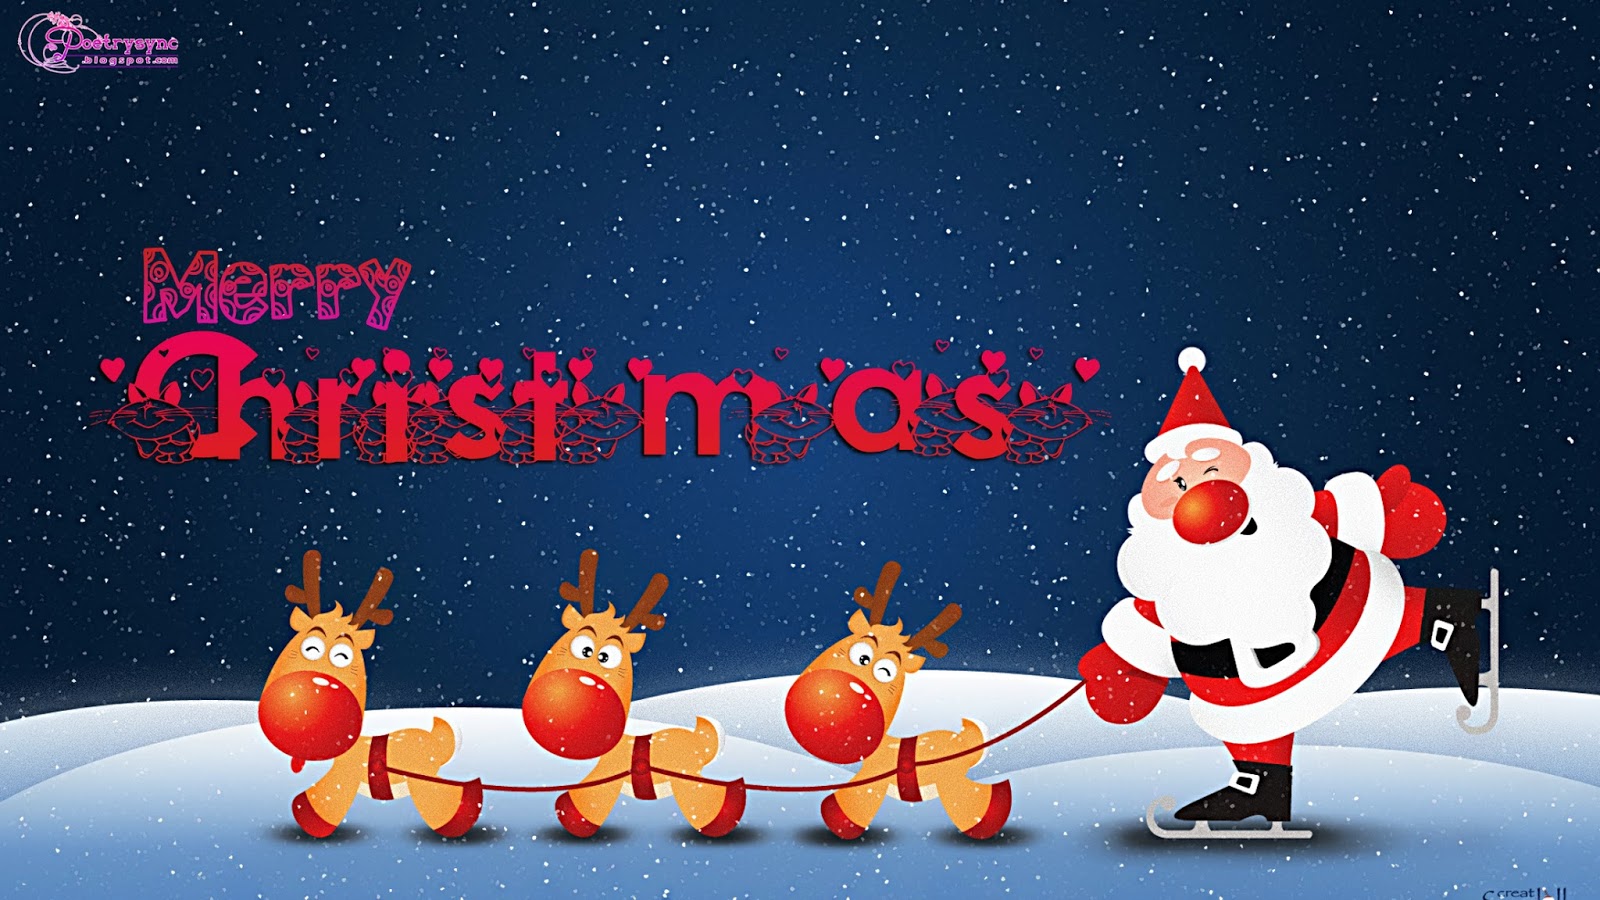 Happy New Year Christmas Wishes And Greetings Wallpaper With Santa